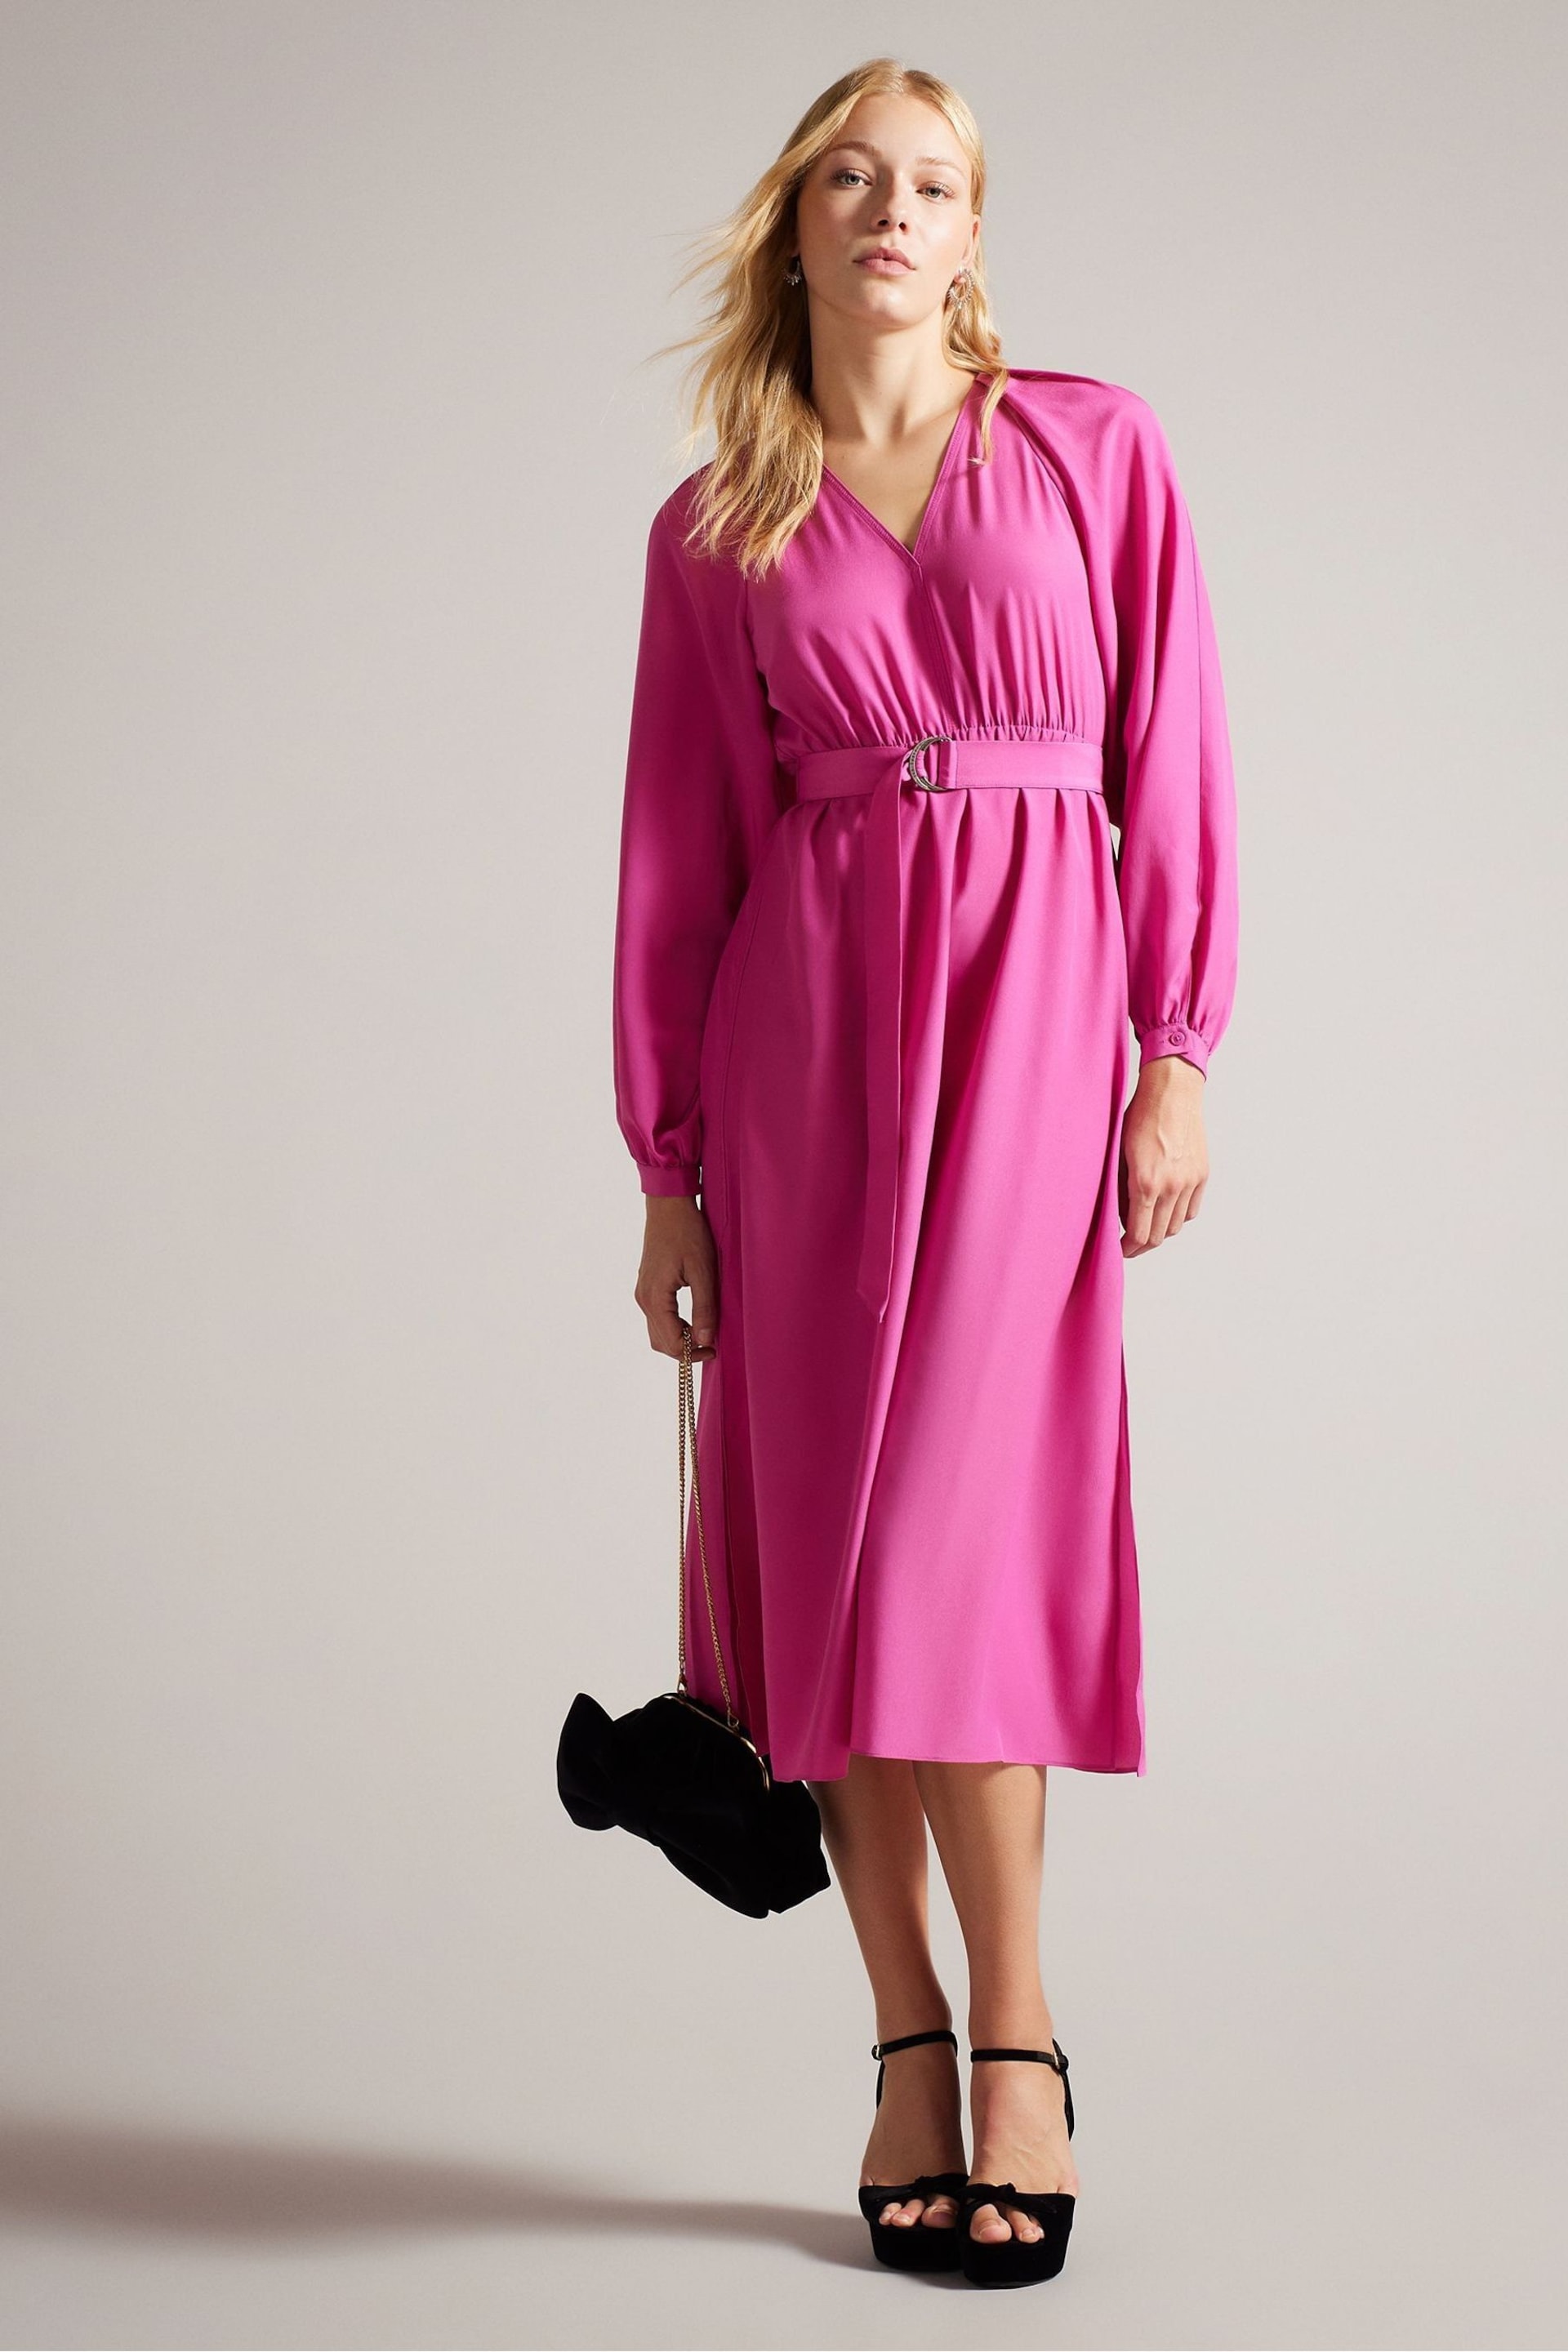 Ted Baker Pink Comus Midi Shirt Dress With Gathered Neck - Image 1 of 5